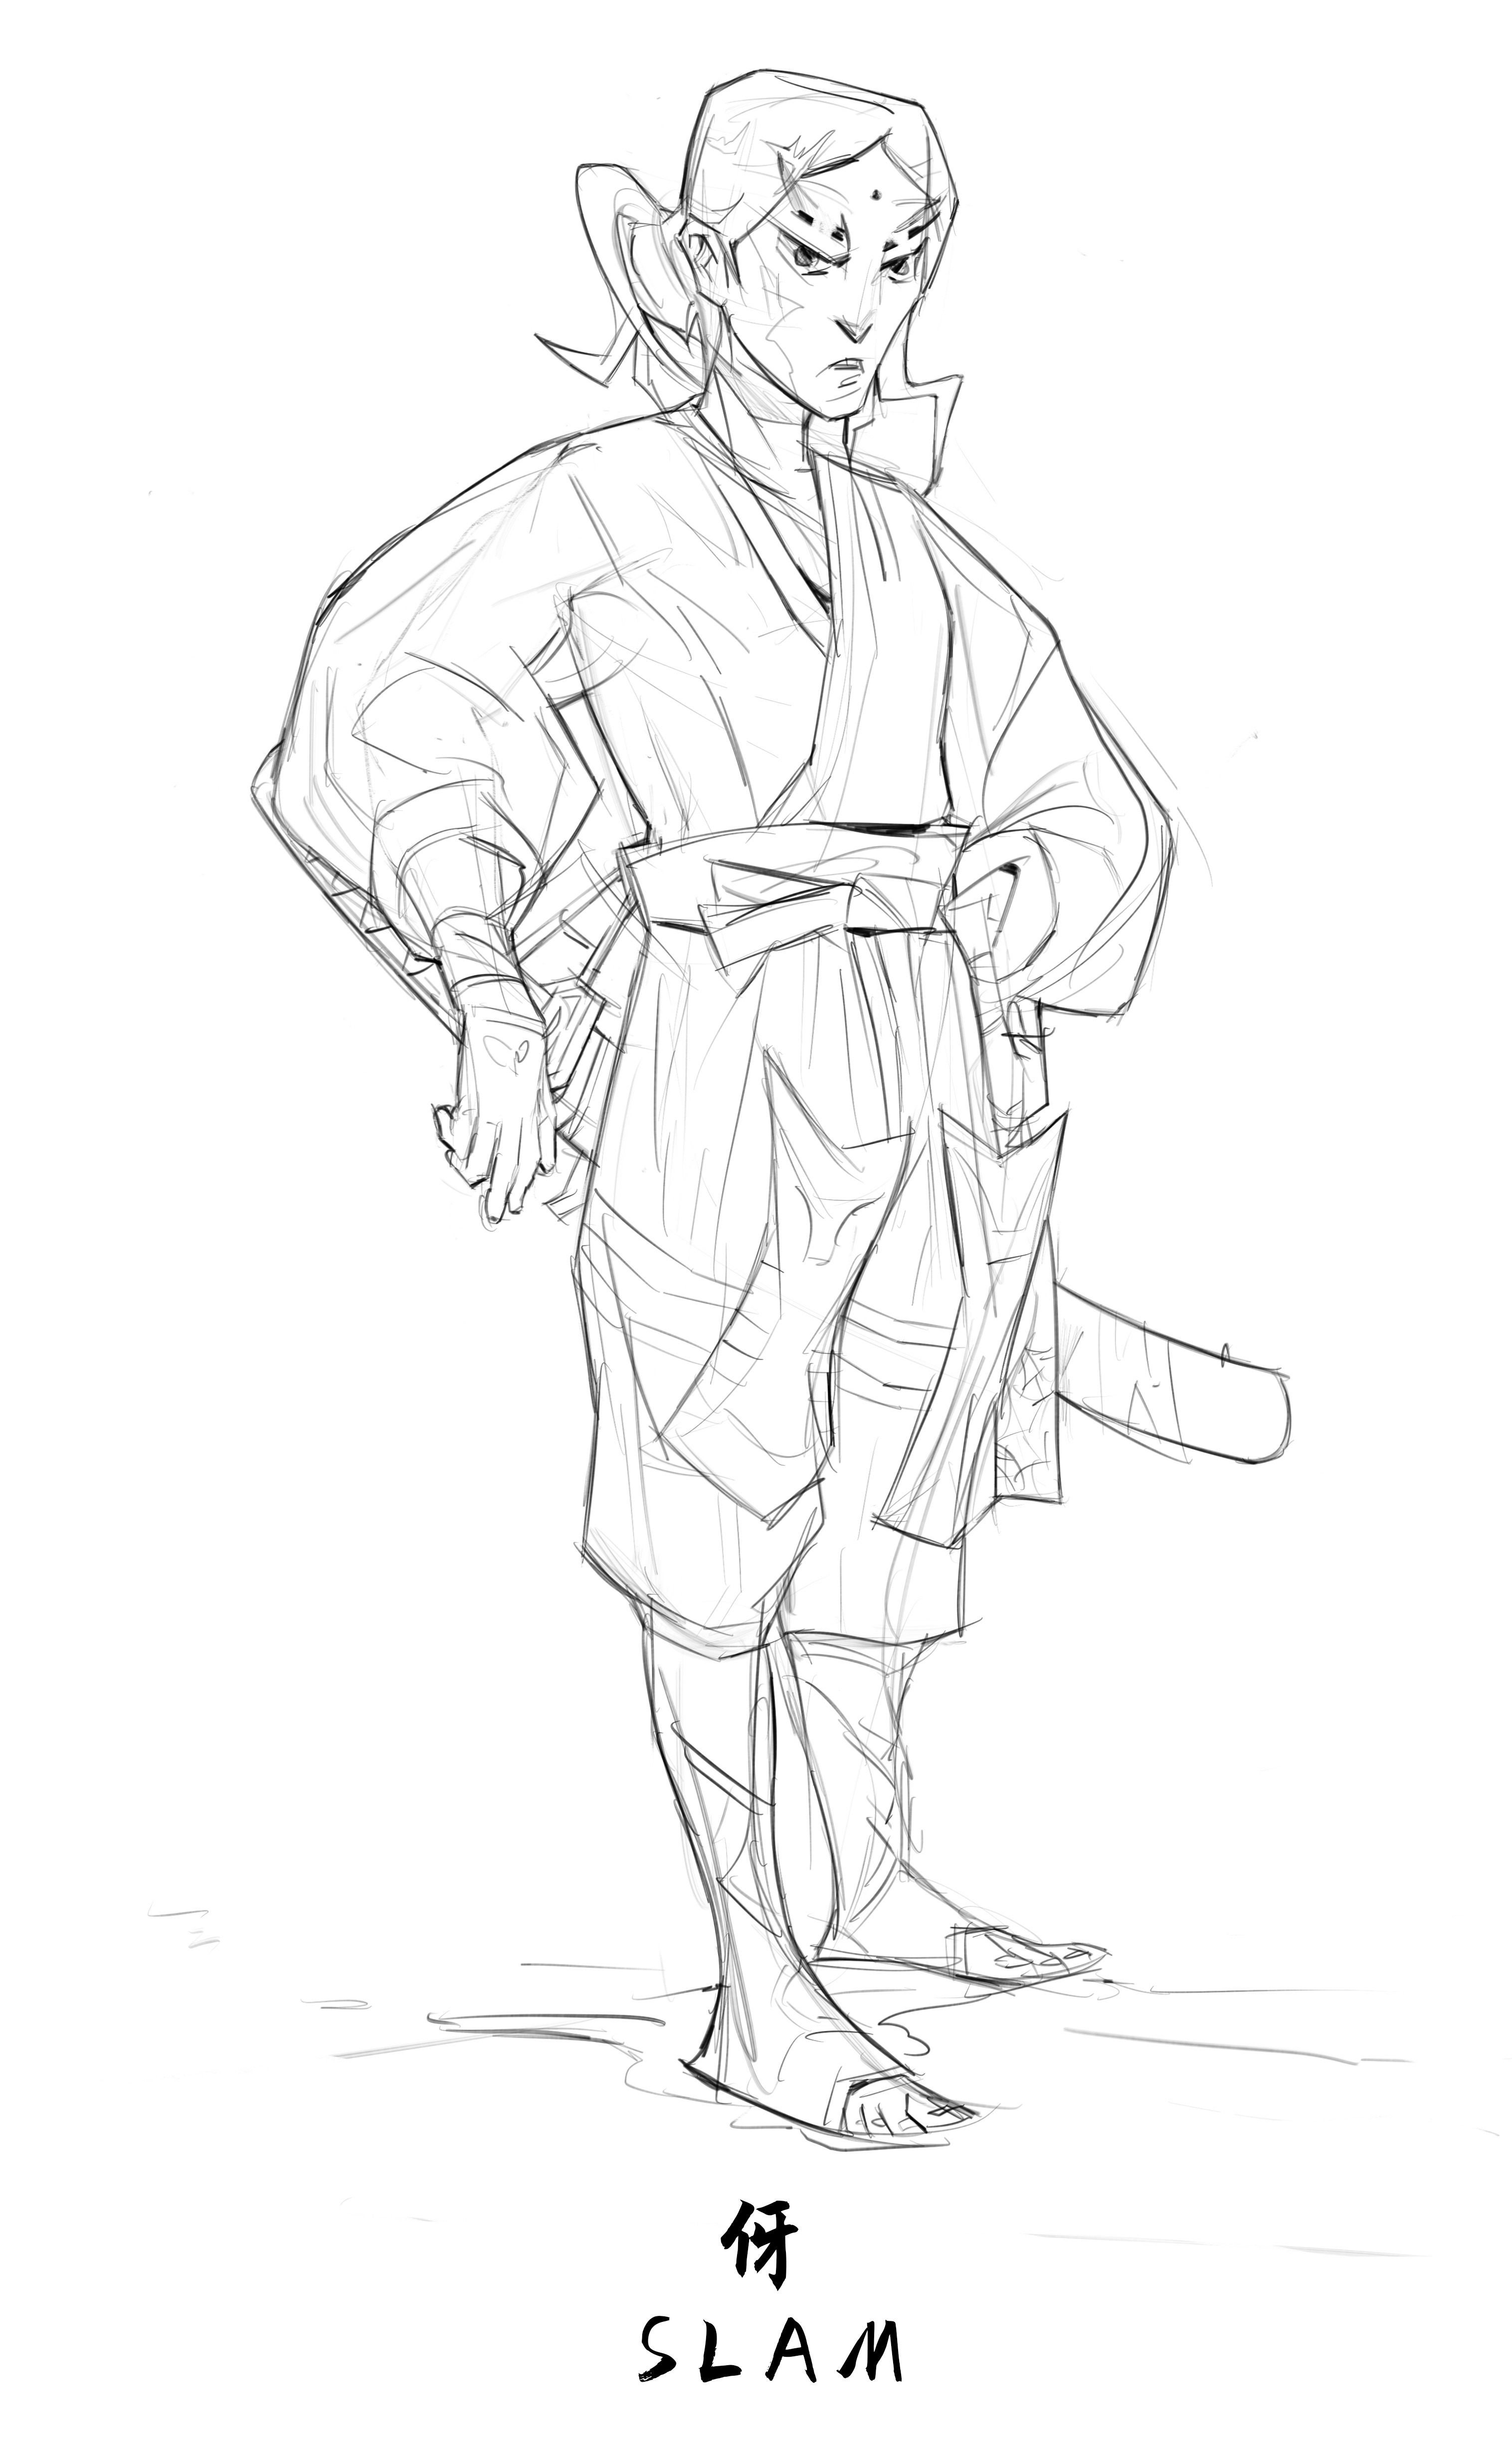 The character design of the Japanese Shogun story